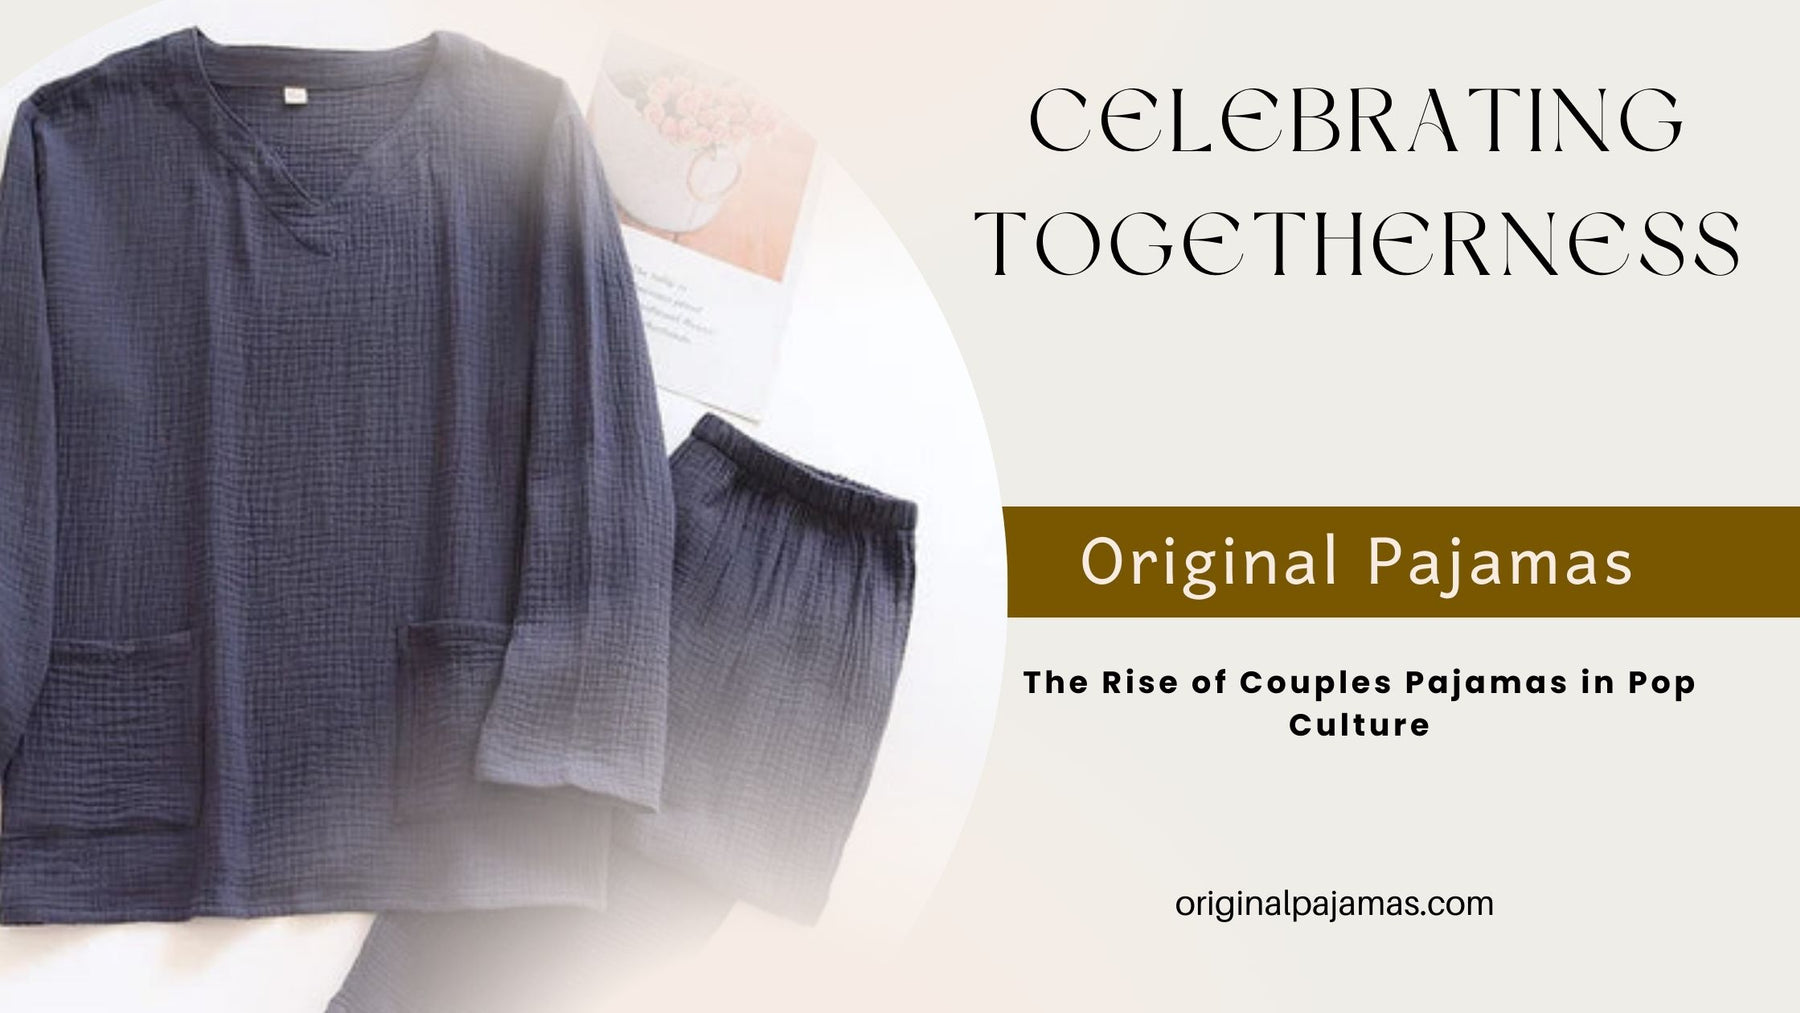 Celebrating Togetherness: The Rise of Couples Pajamas in Pop Culture